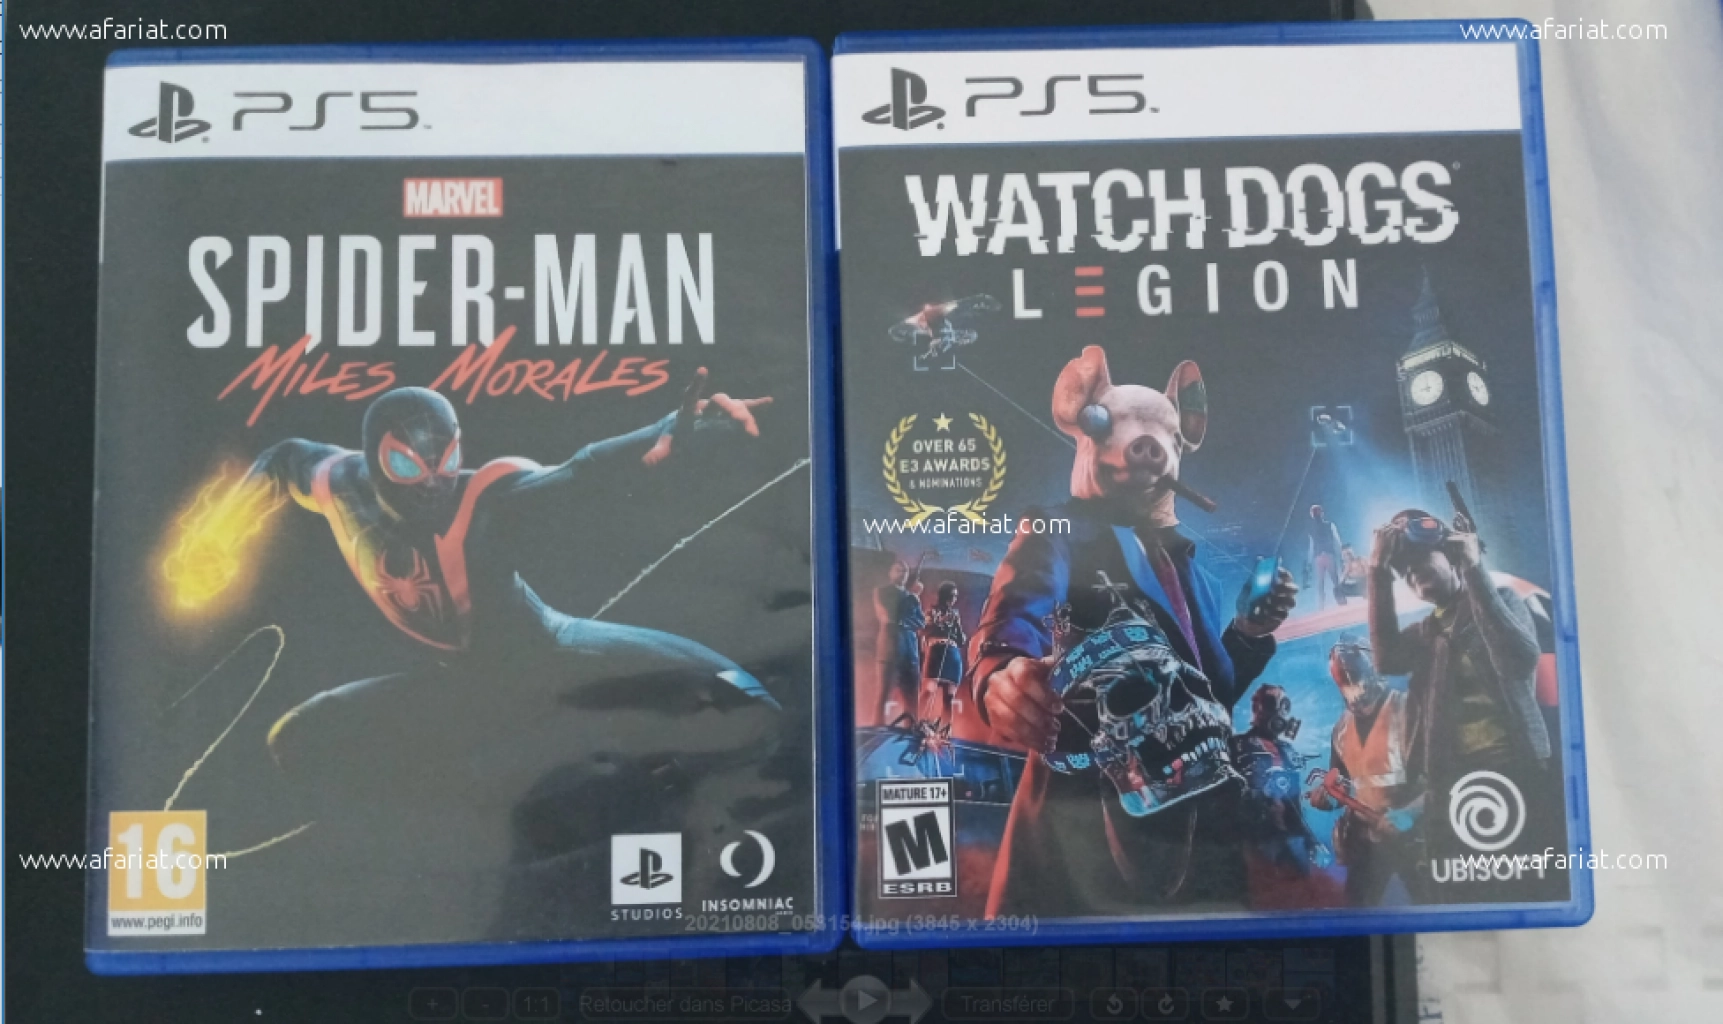 2 JEux PS5 Spiderman Watch dogs